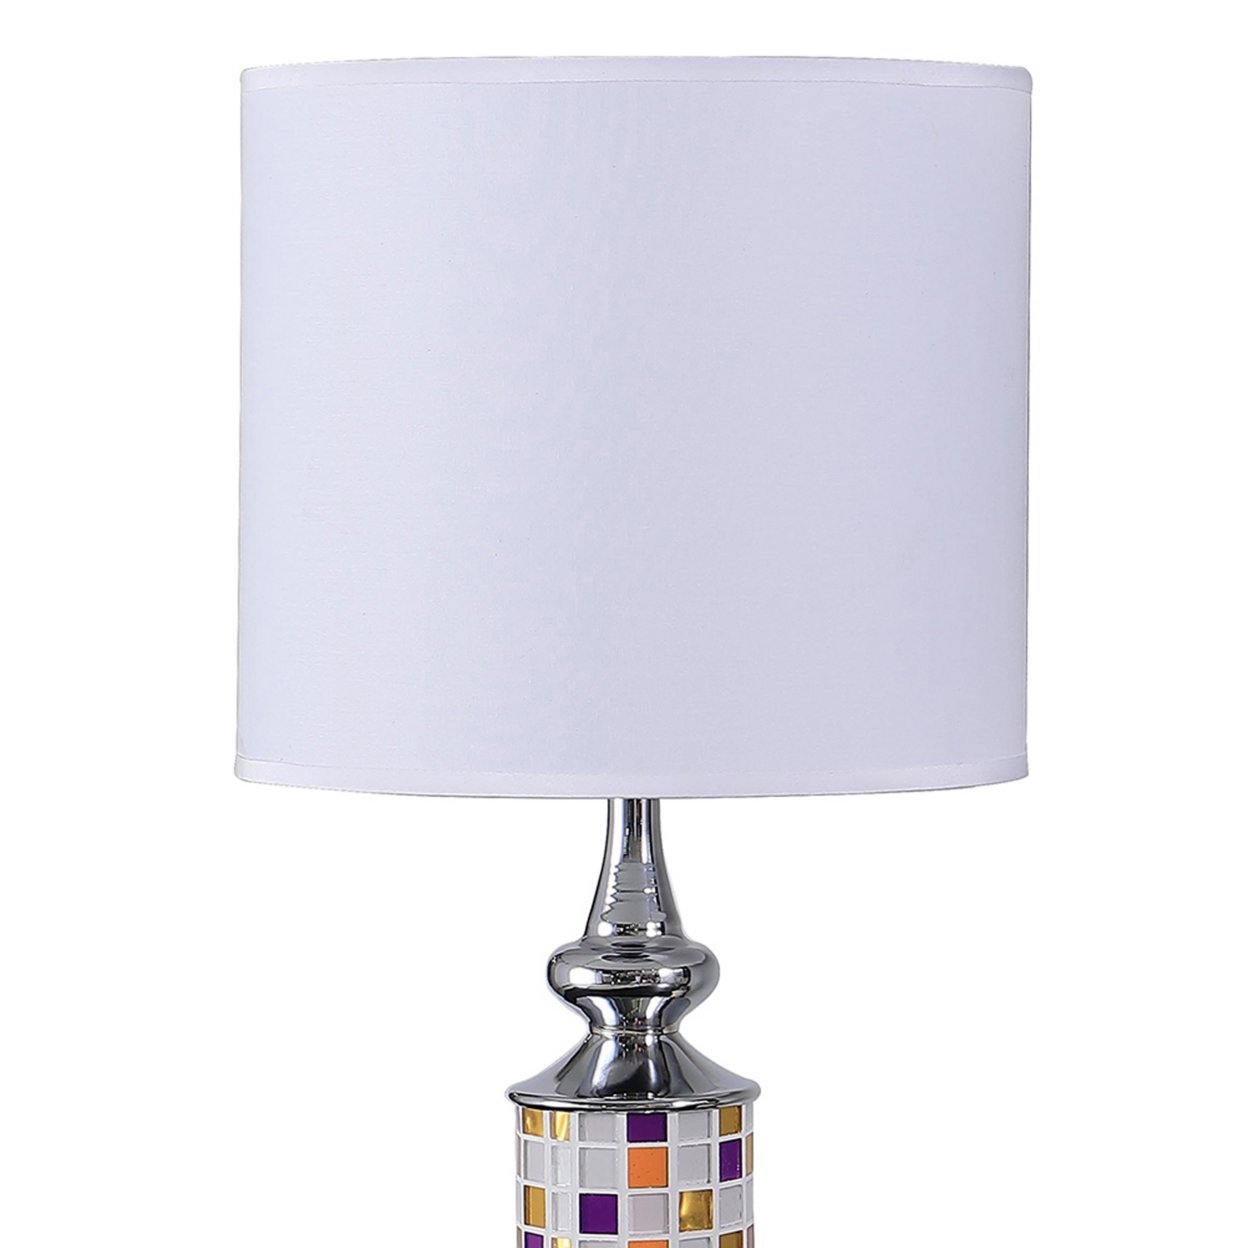 Table Lamp With Glass Cut Out Mosaic Pattern, Silver- Saltoro Sherpi